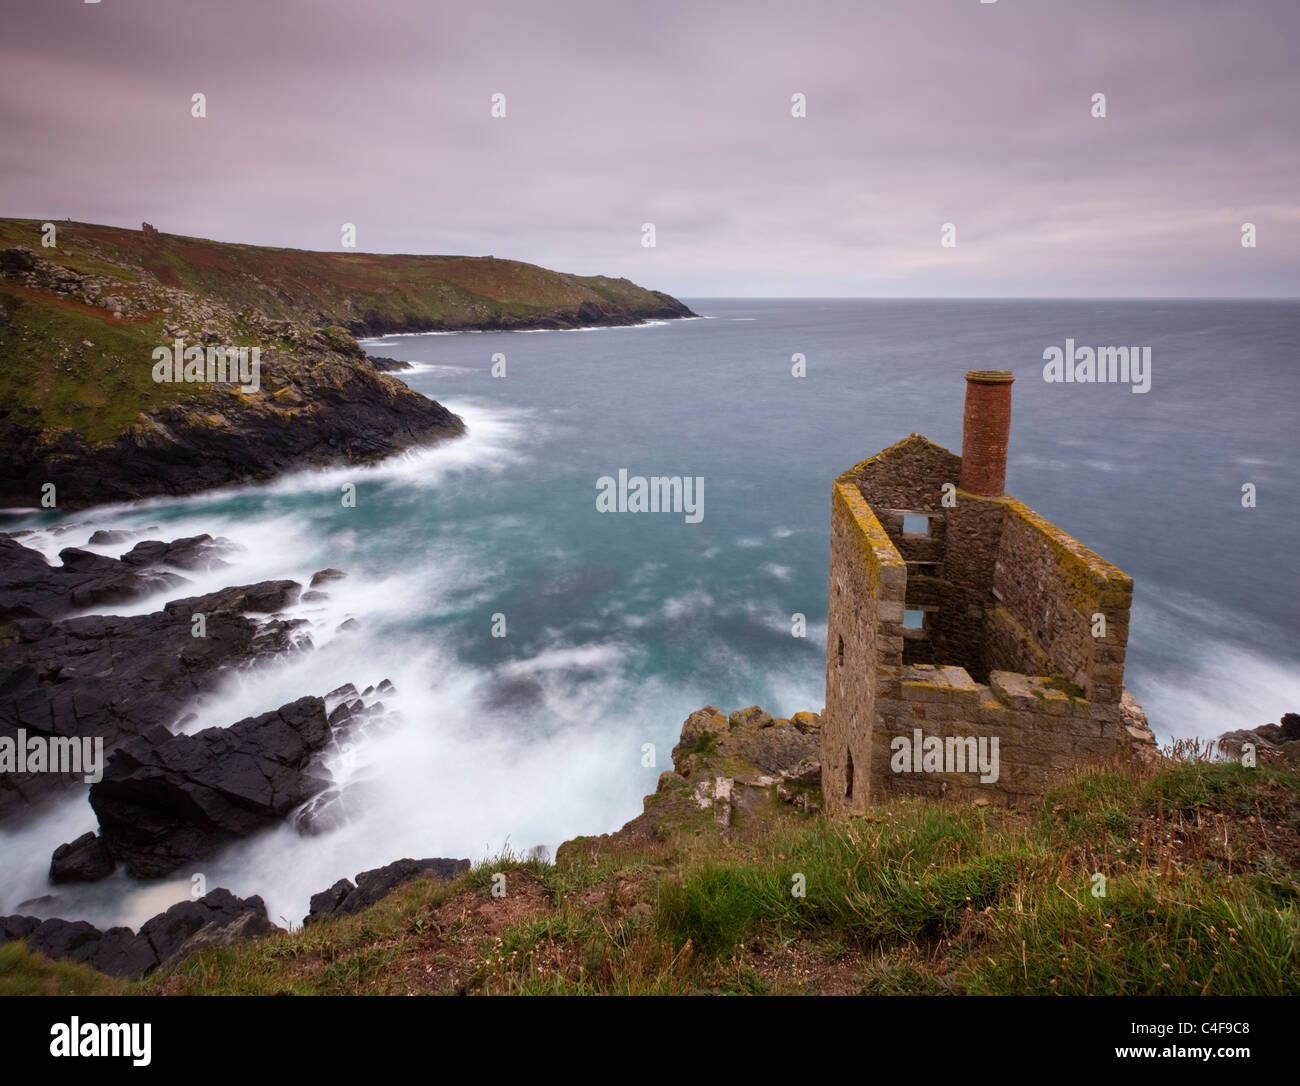 Abandoned tin mine engine house on the clifftops at Botallack near St Just, Cornwall, England. Autumn (October) 2009. Stock Photo